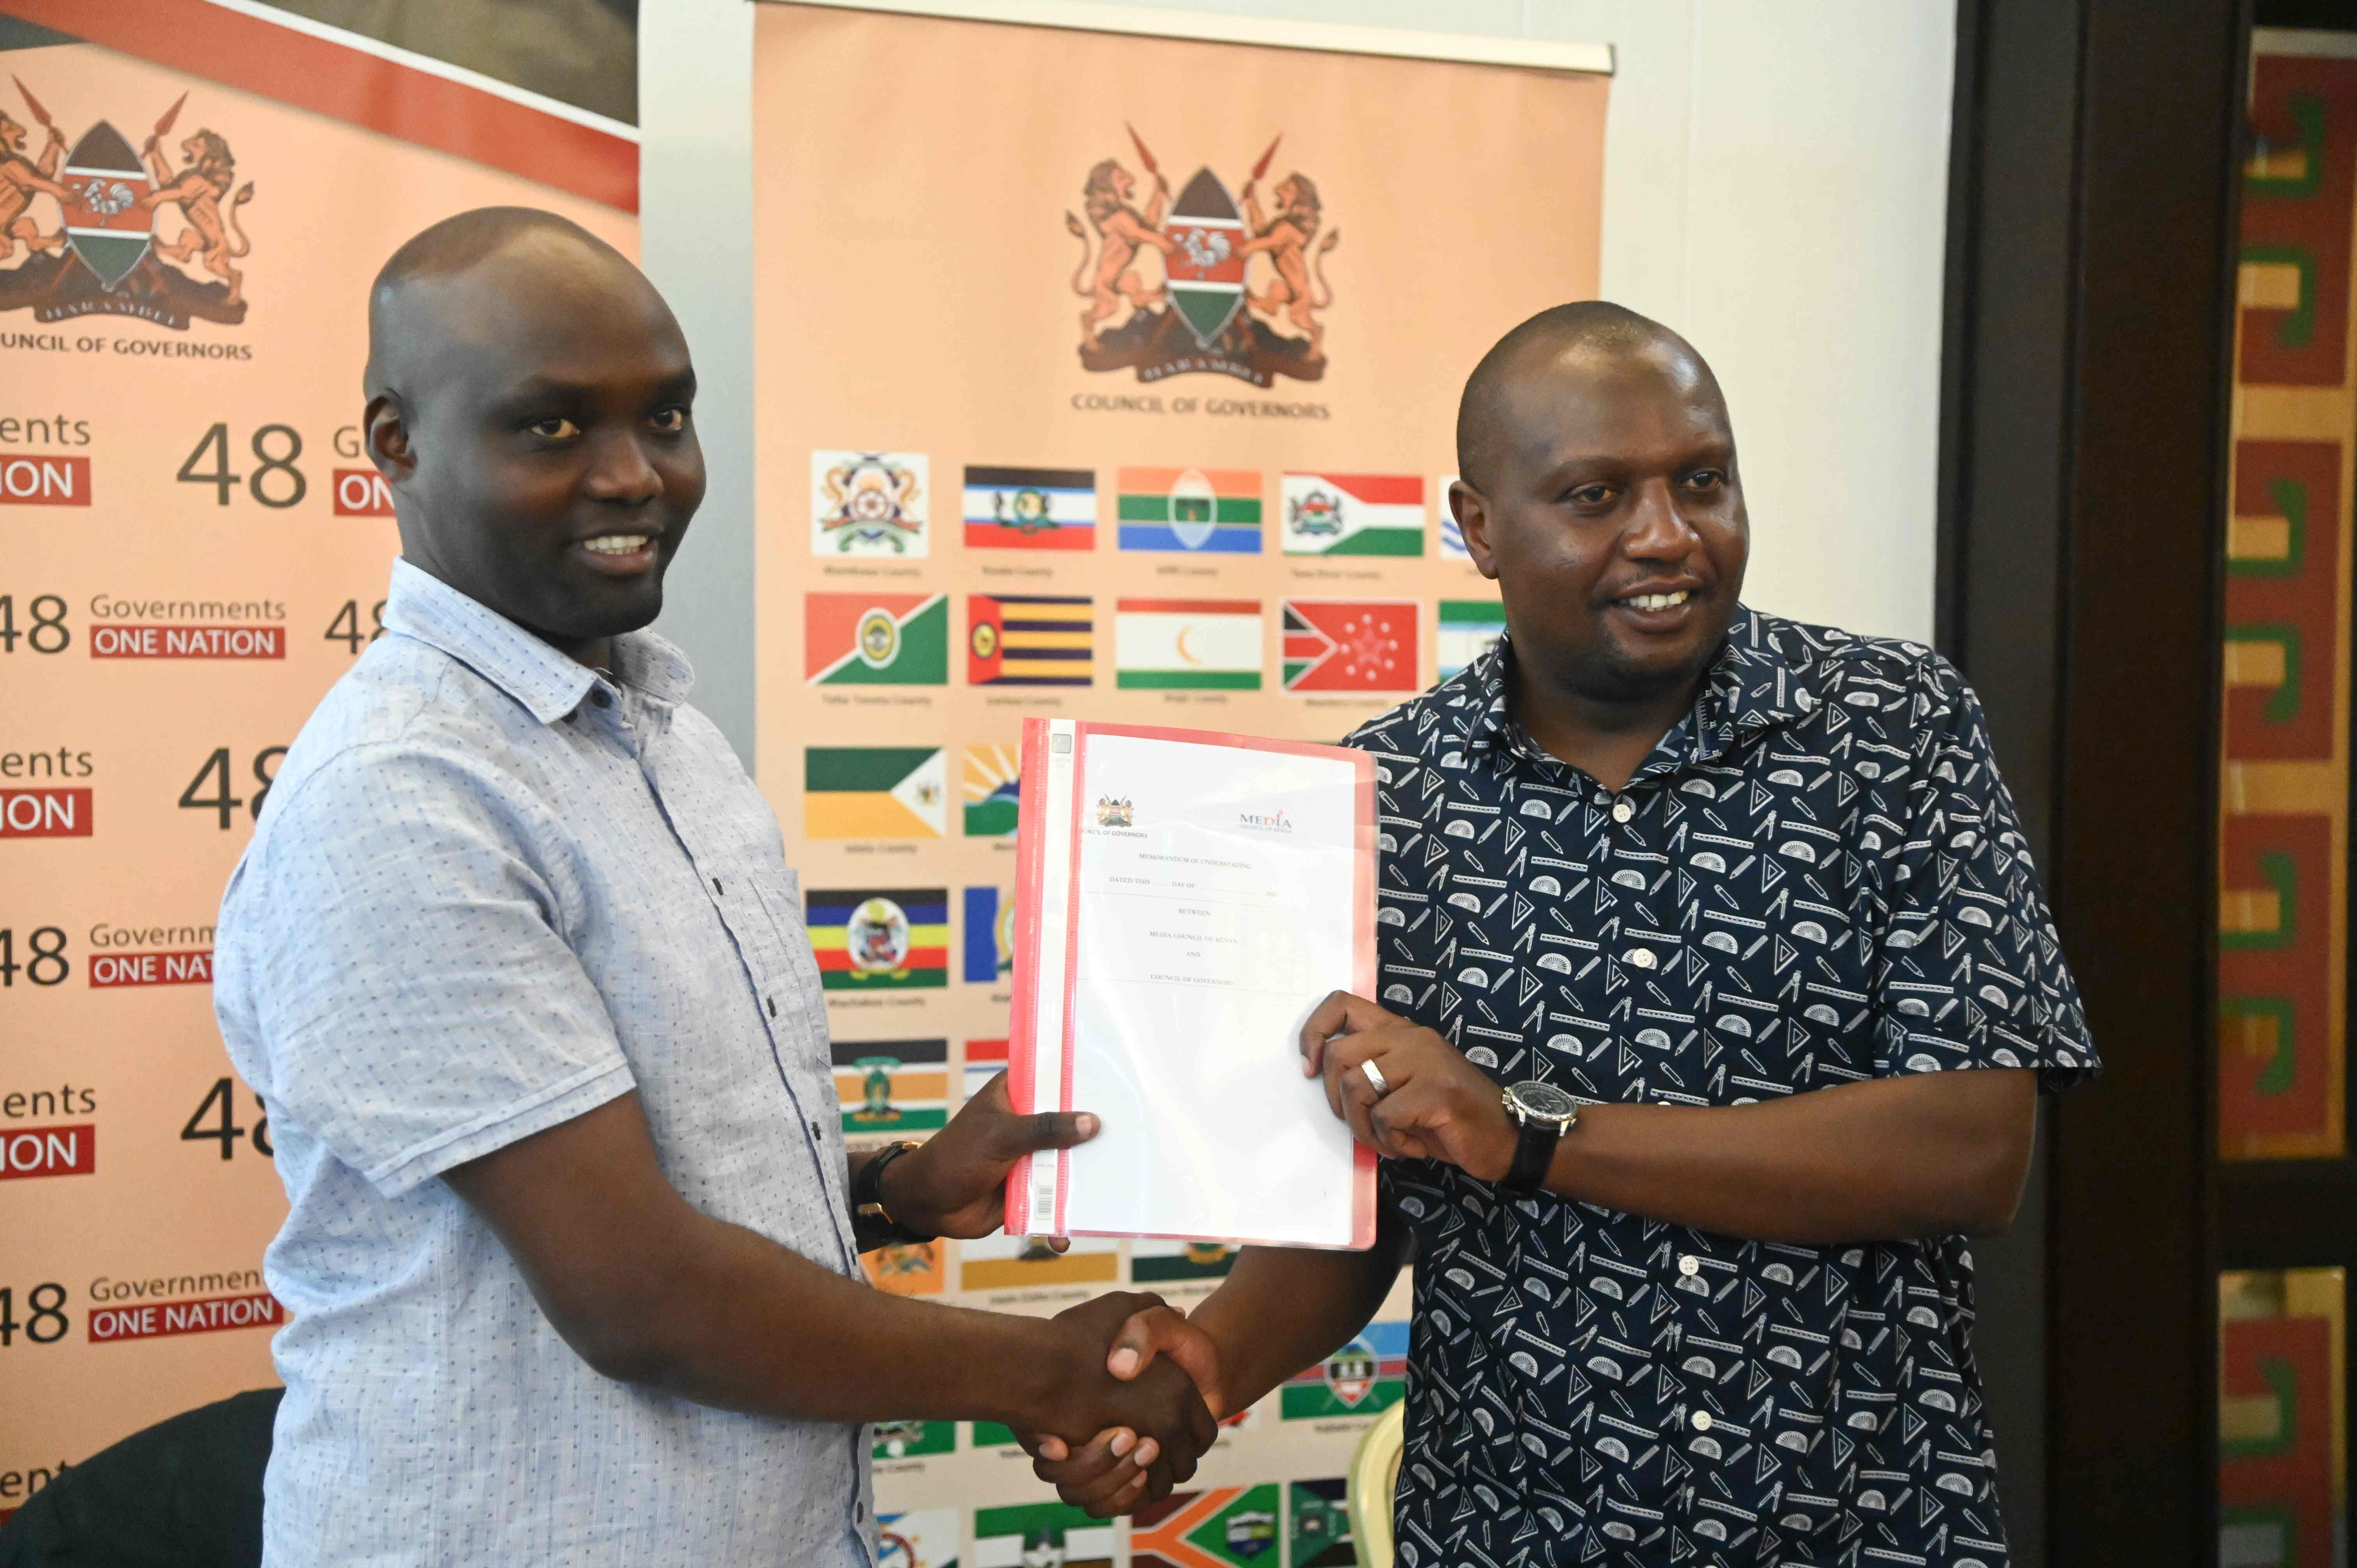 Media Council of Kenya and Council of Governors Partner to tell the Devolution Story 